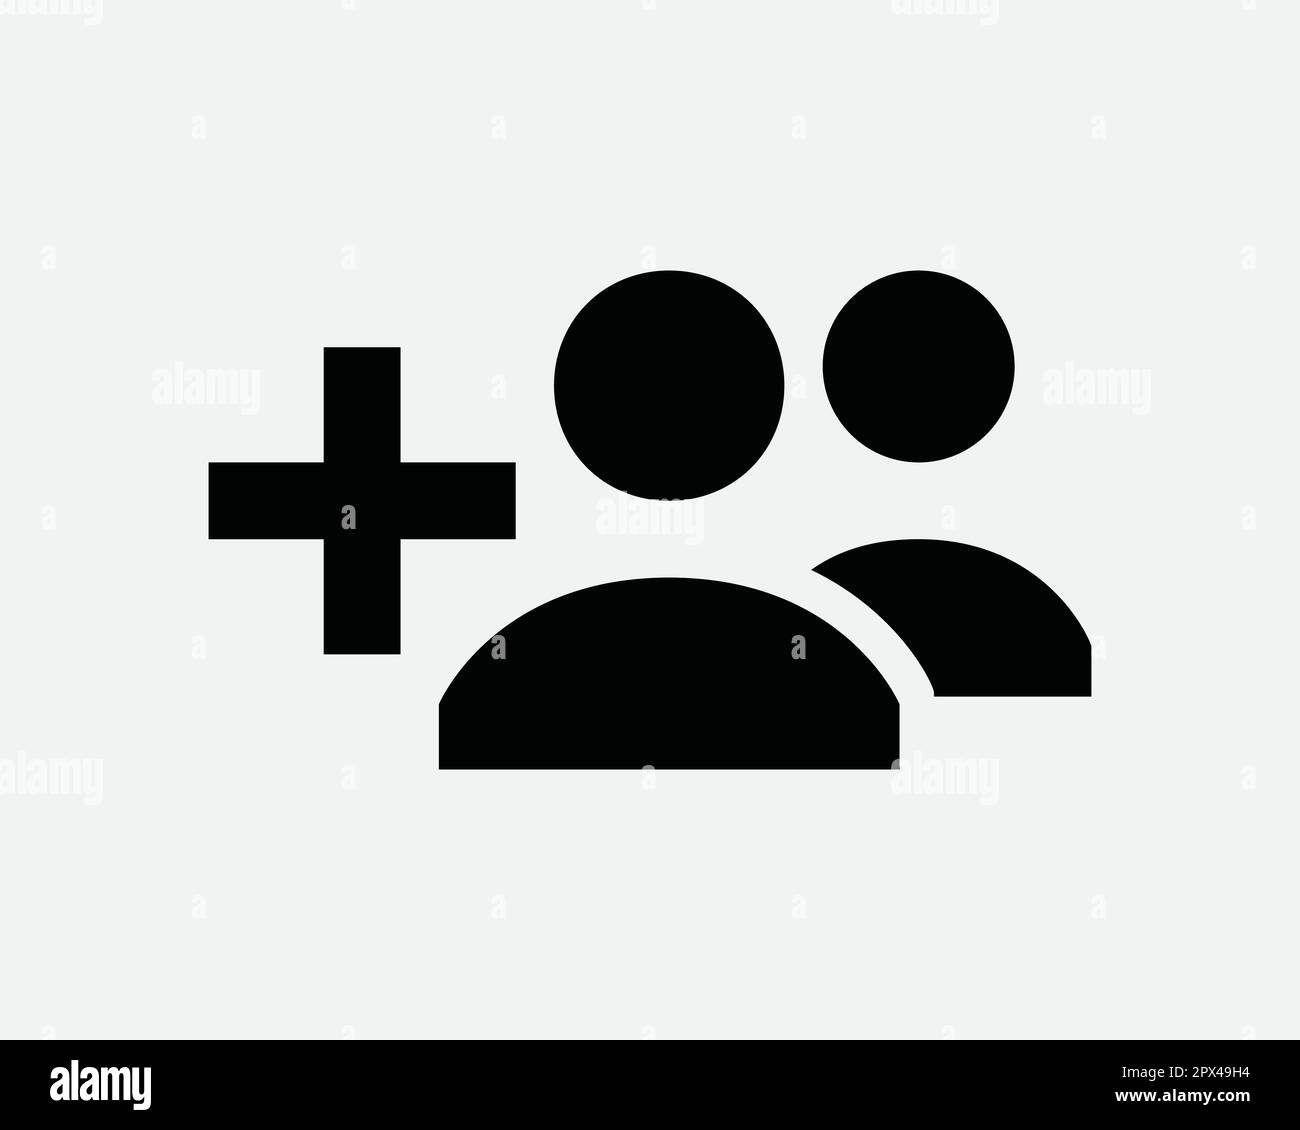 Add User Group Business Partnership Person Man Team Member Black and White Icon Sign Symbol Vector Artwork Clipart Illustration Stock Vector